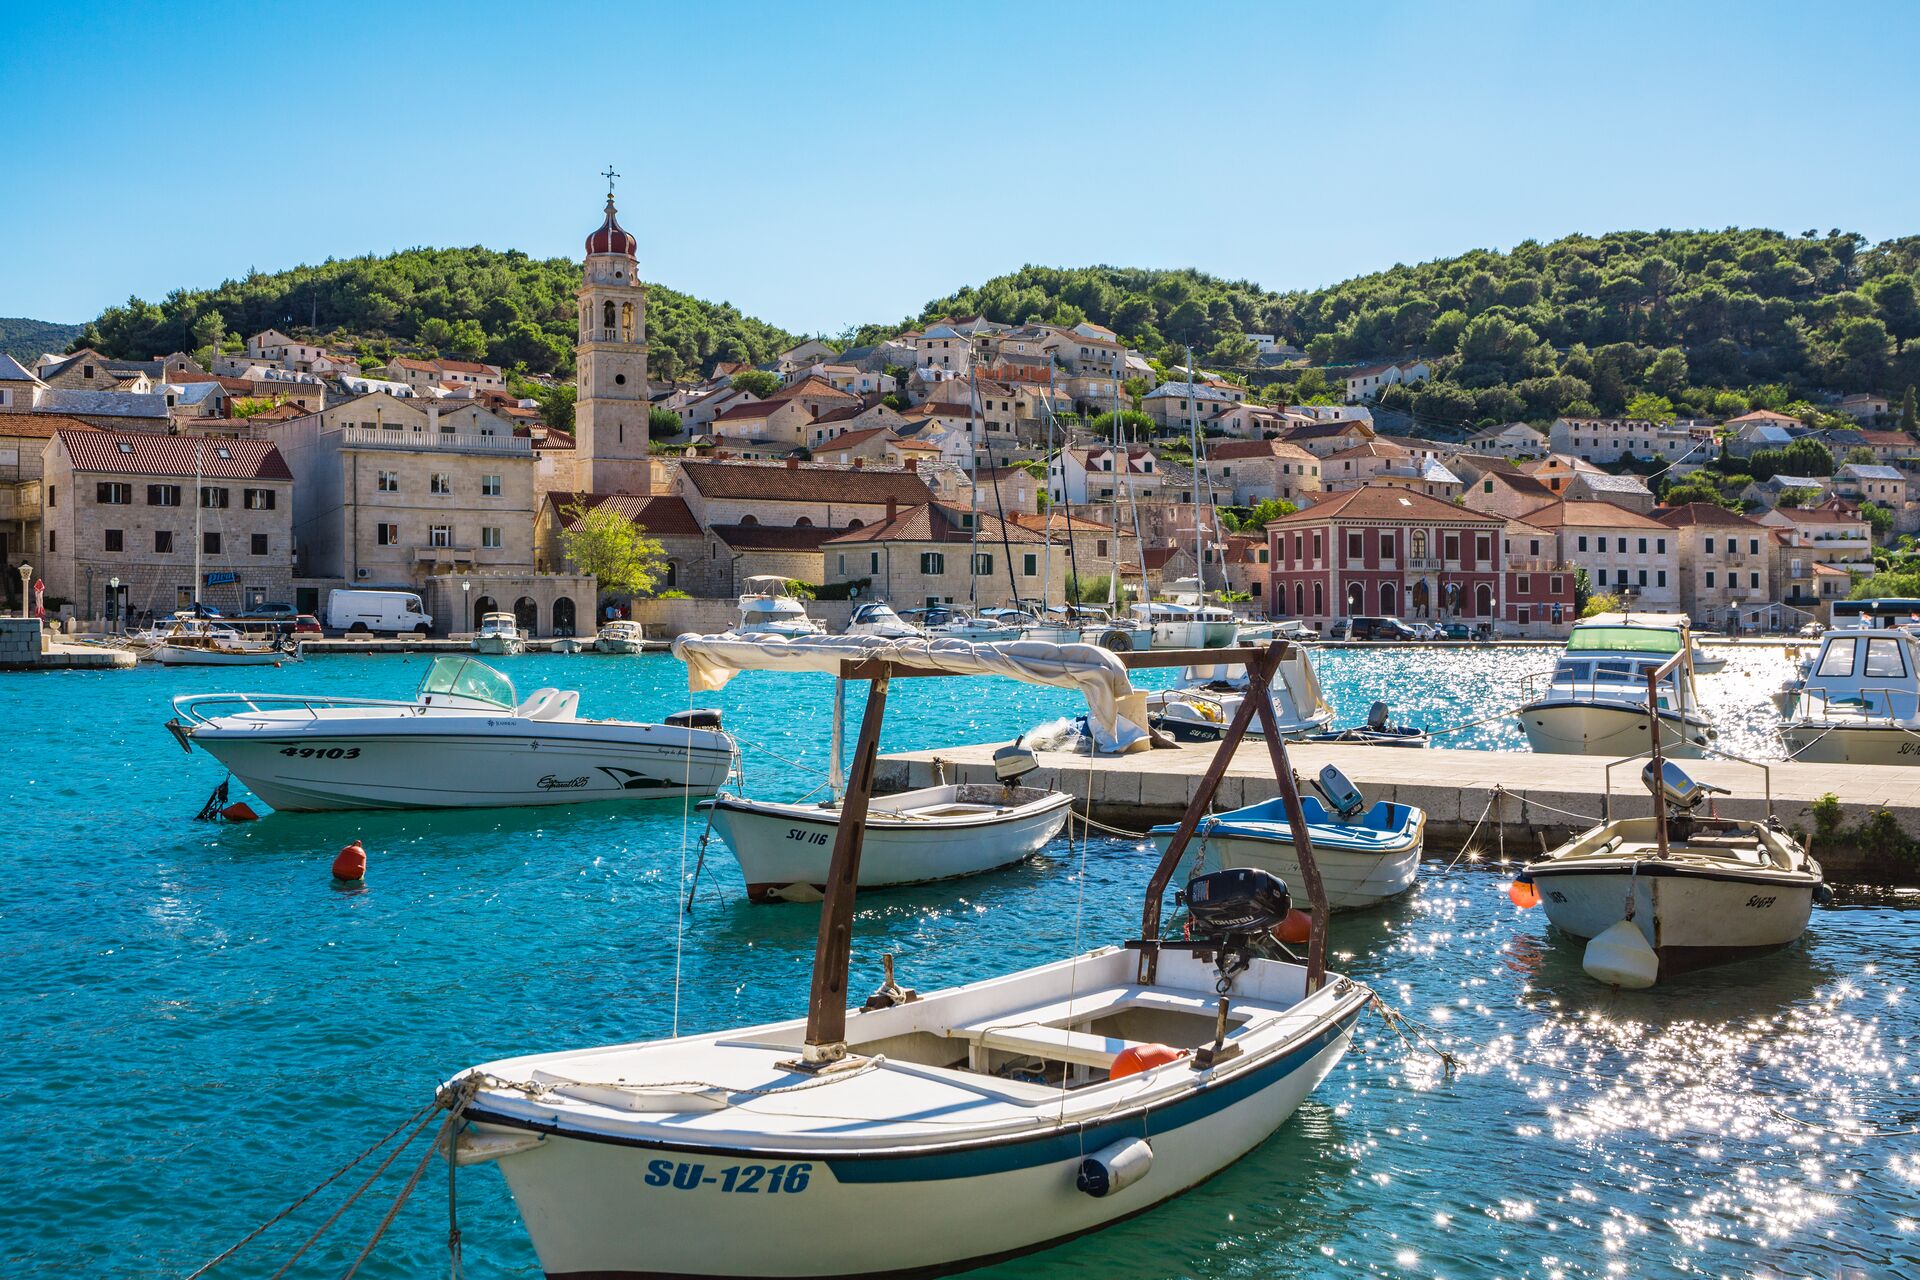 An expert’s guide to finding your perfect island on Croatia’s Dalmatian coast